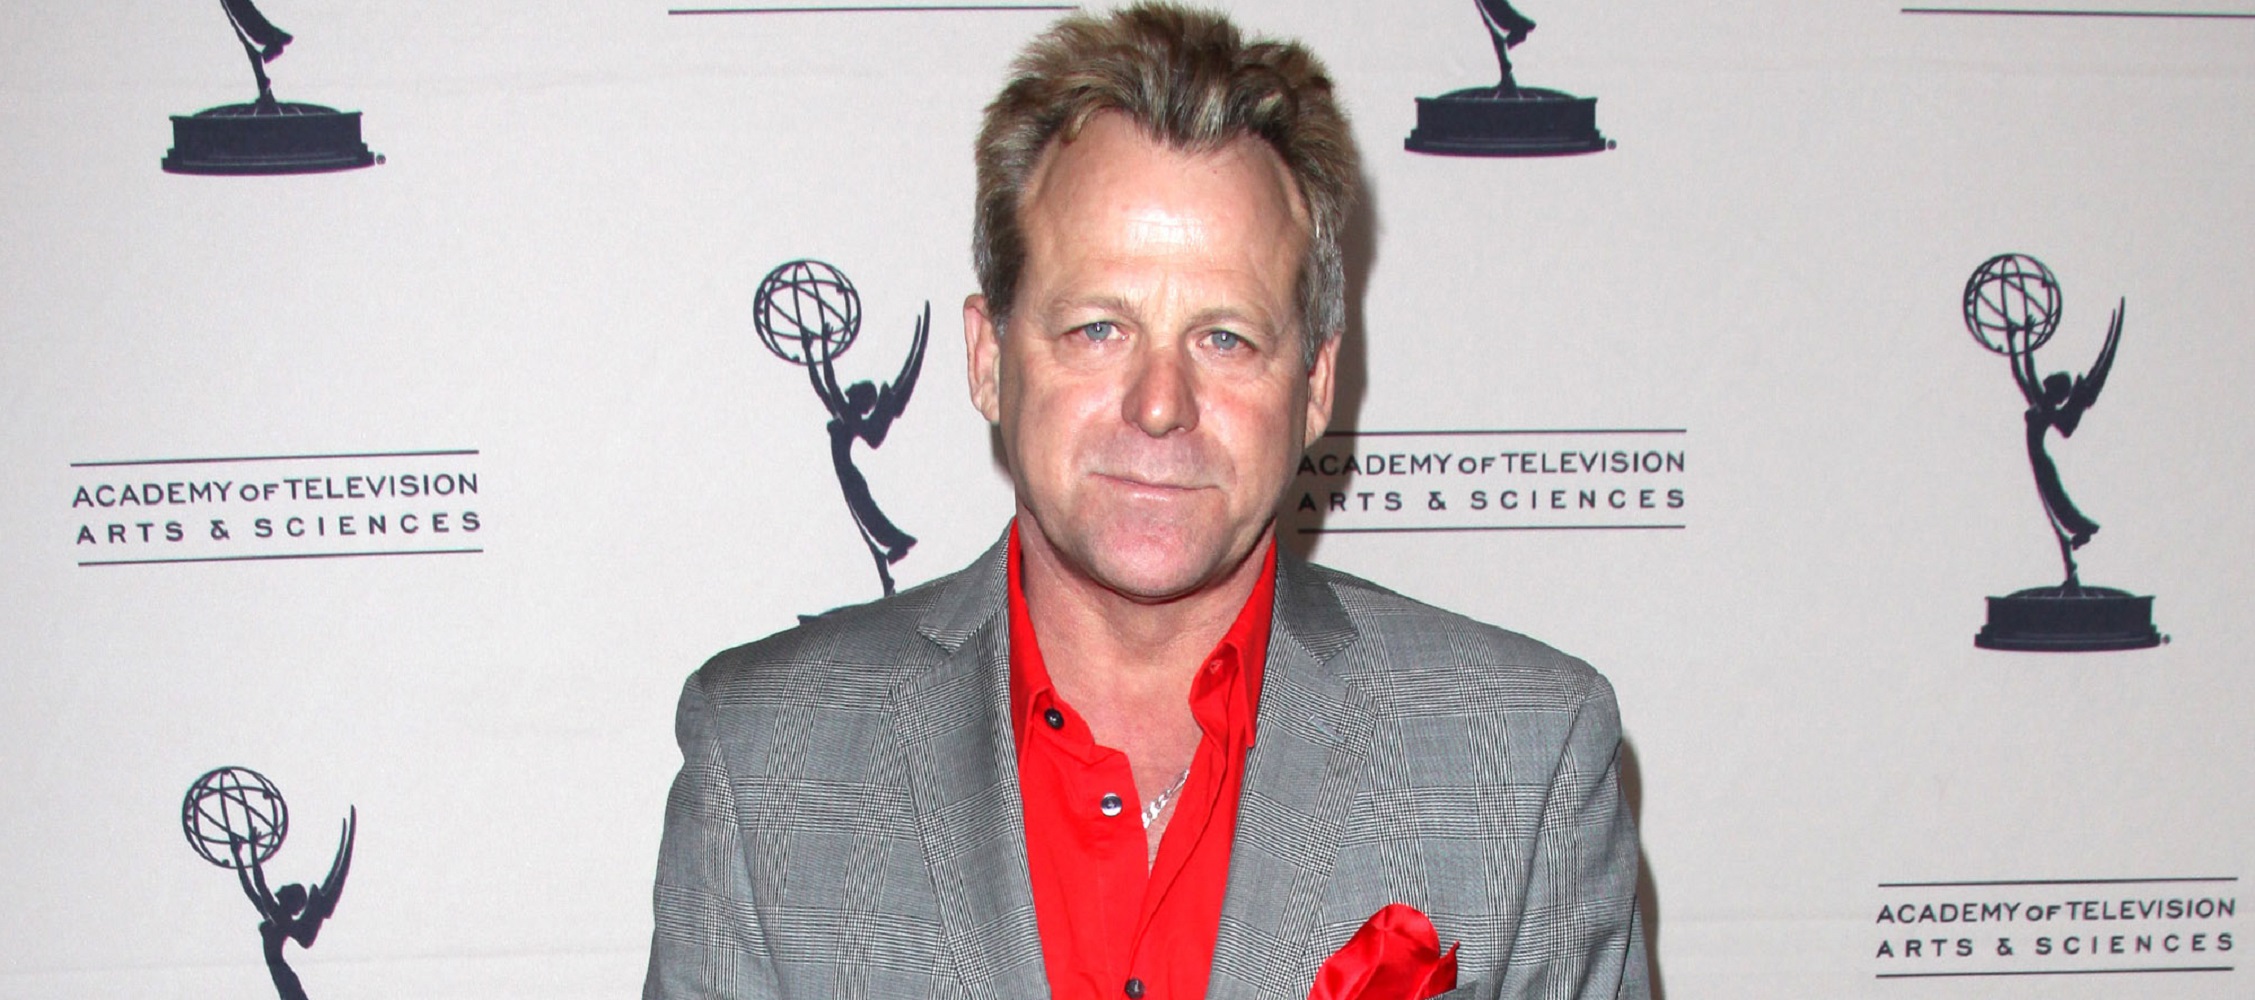 General Hospital weekly recap focuses on Scotty, portrayed by Kin Shriner, pictured here in a grey jacket and red shirt